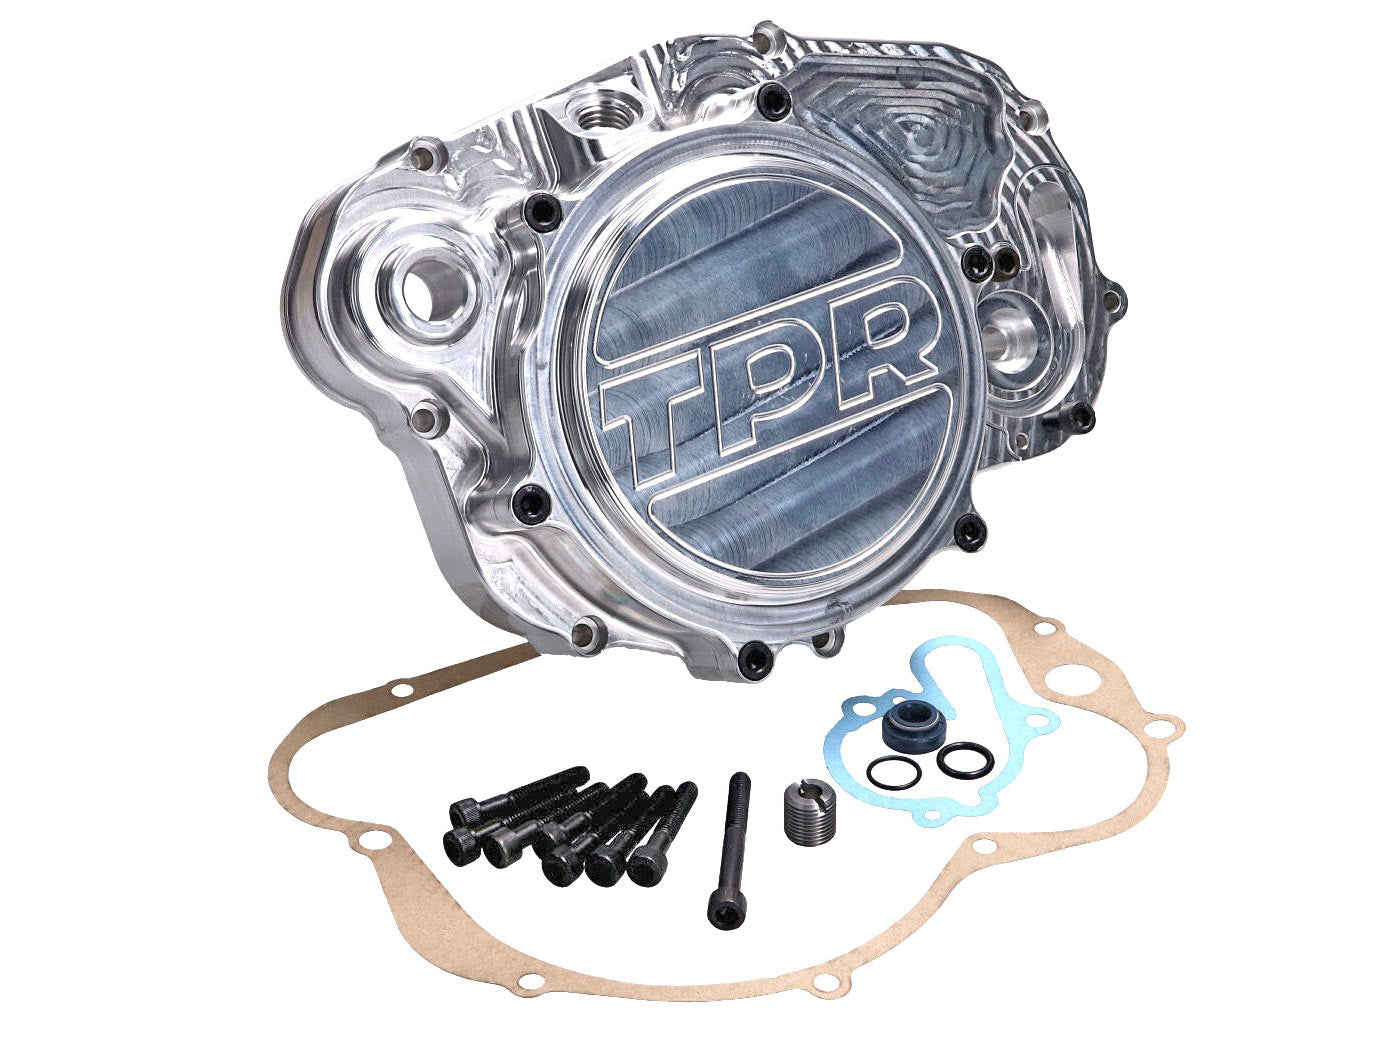 Top Performances Billet Clutch Cover for Sherco, AM6